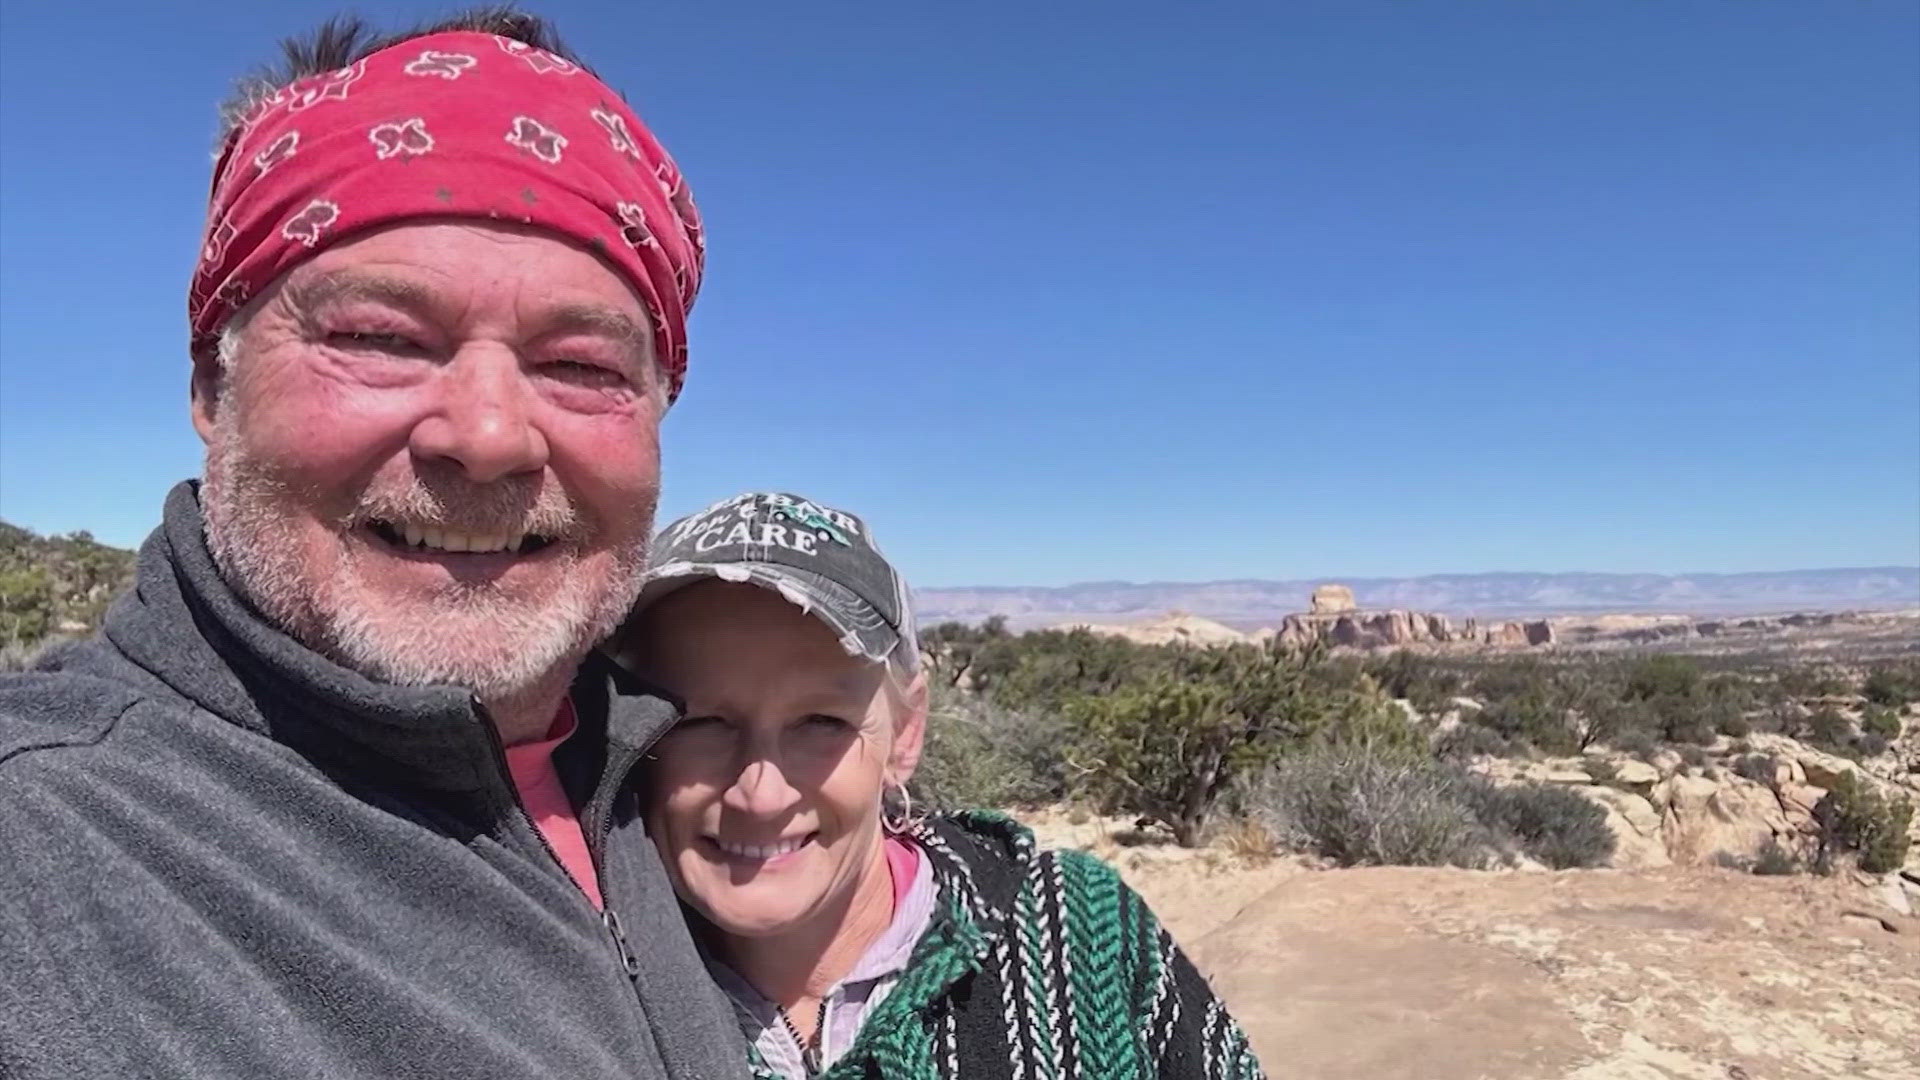 Ray, 58, and Maranda, 50, Ankofski were reported missing on June 21 after they didn't return as scheduled from Steel Bender, a popular off-roading trail.